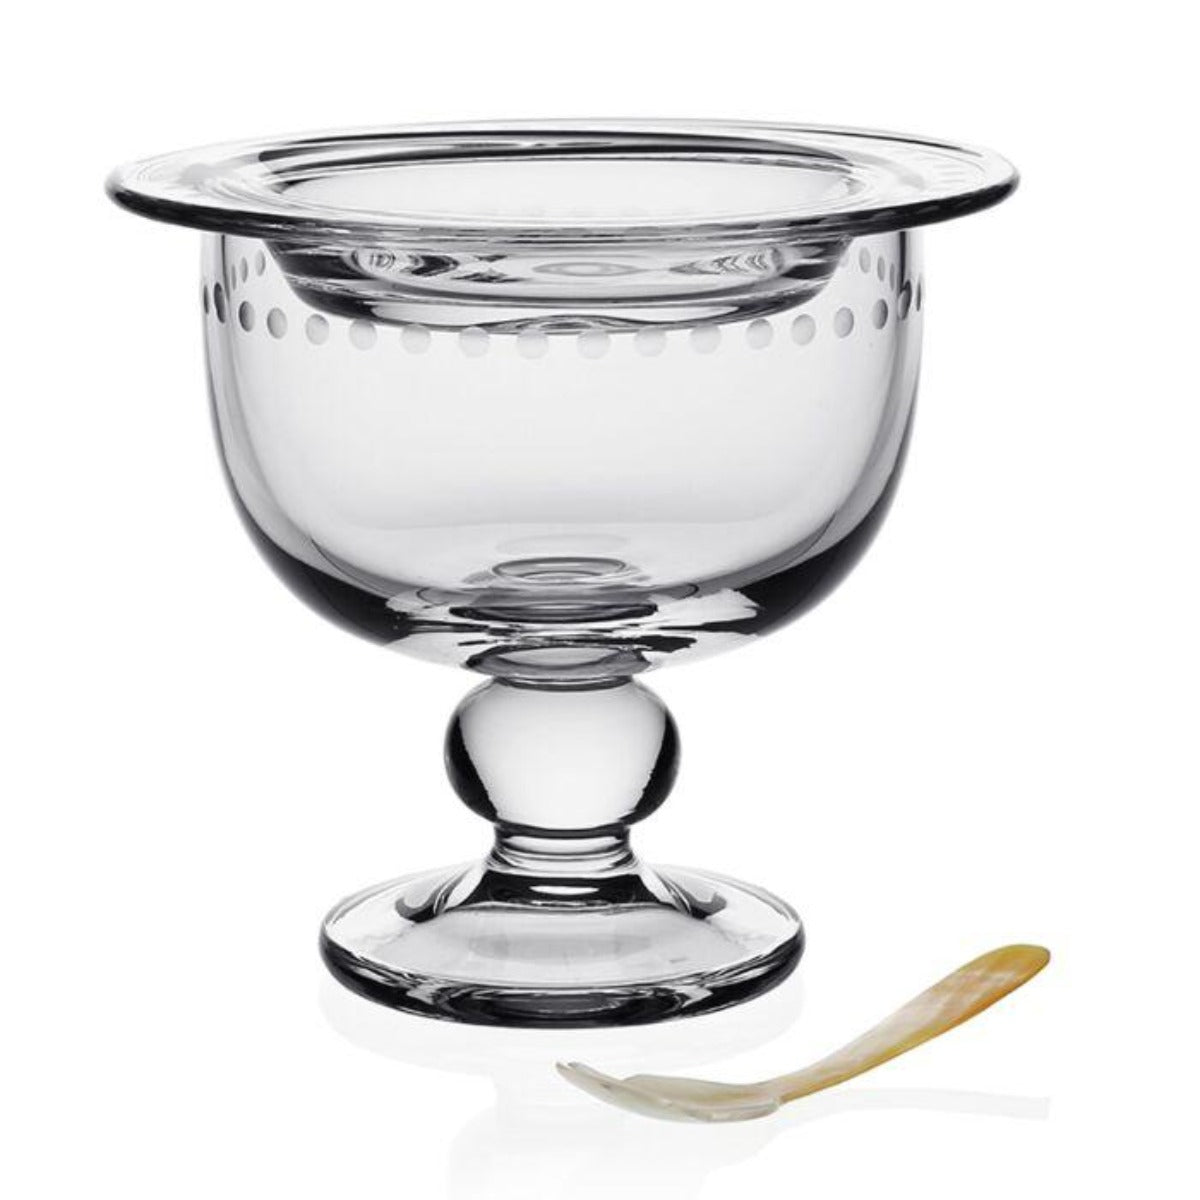 William Yeoward Katerina Caviar Server for Two with Spoon-Bespoke Designs